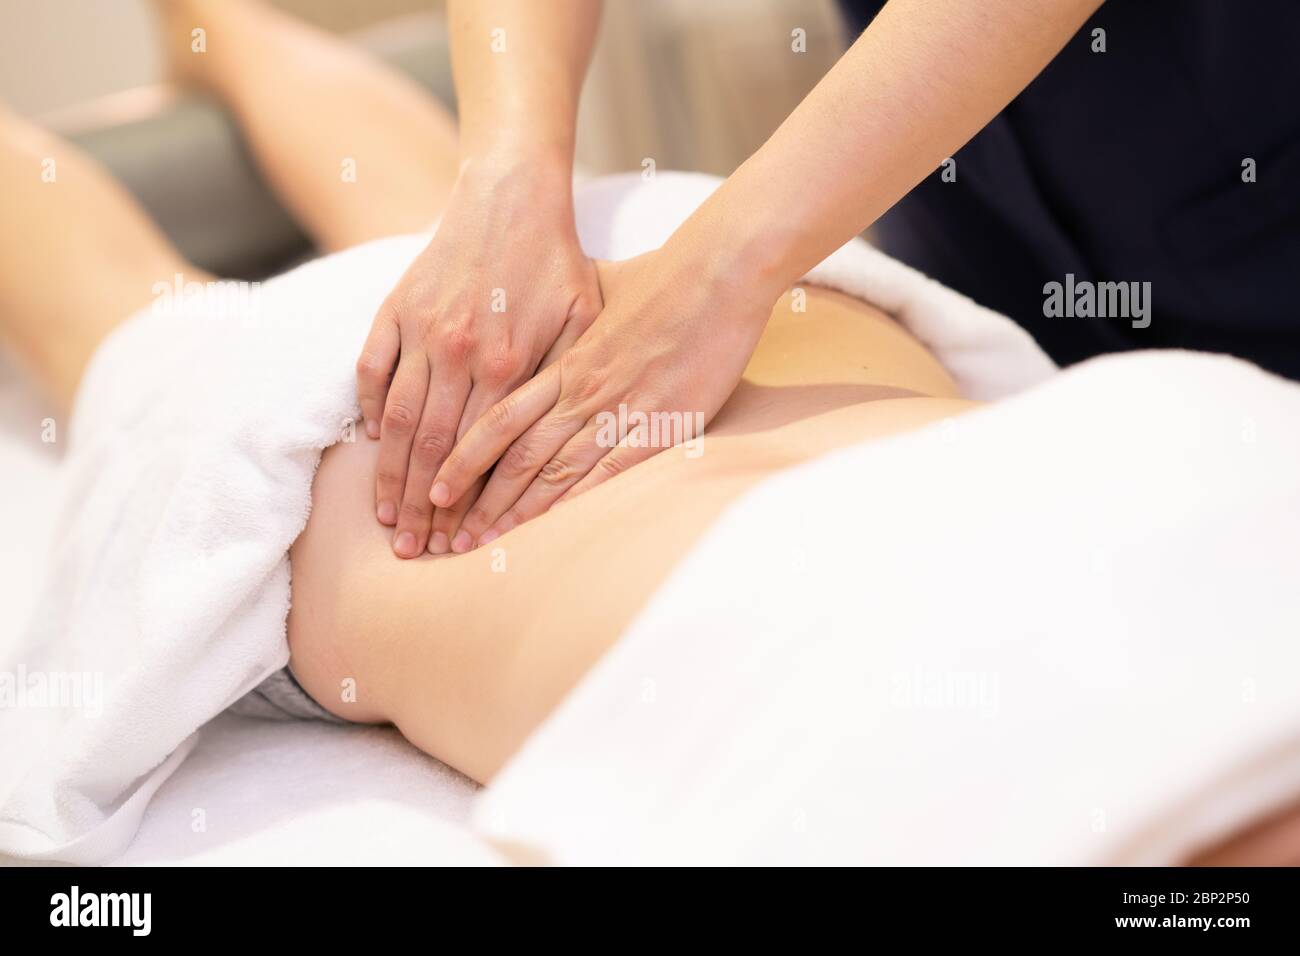 Young woman receiving a back massage in a spa center Stock Photo